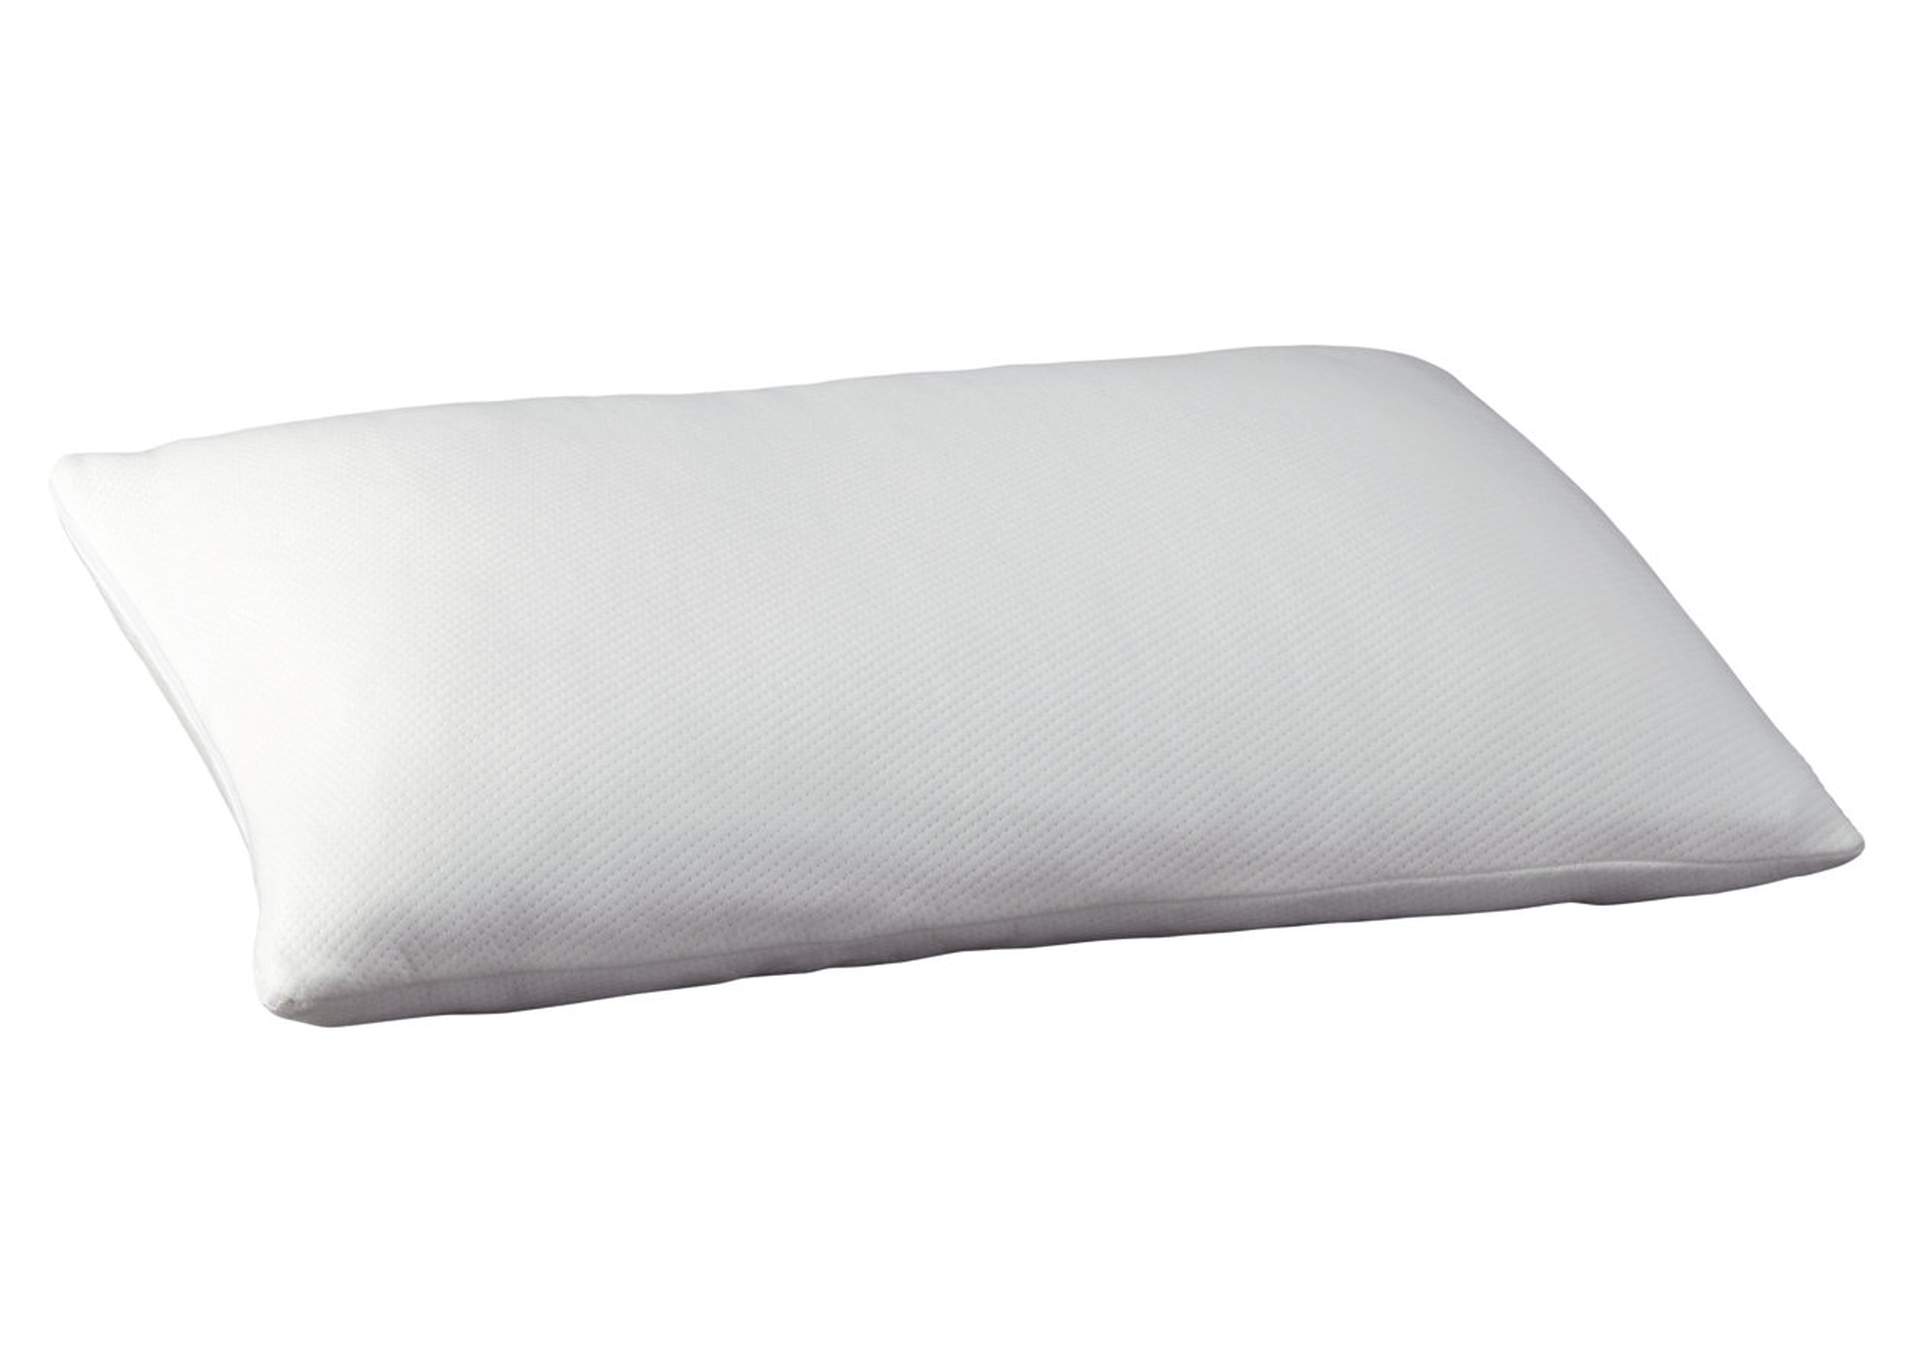 Promotional Memory Foam Pillow,Direct To Consumer Express